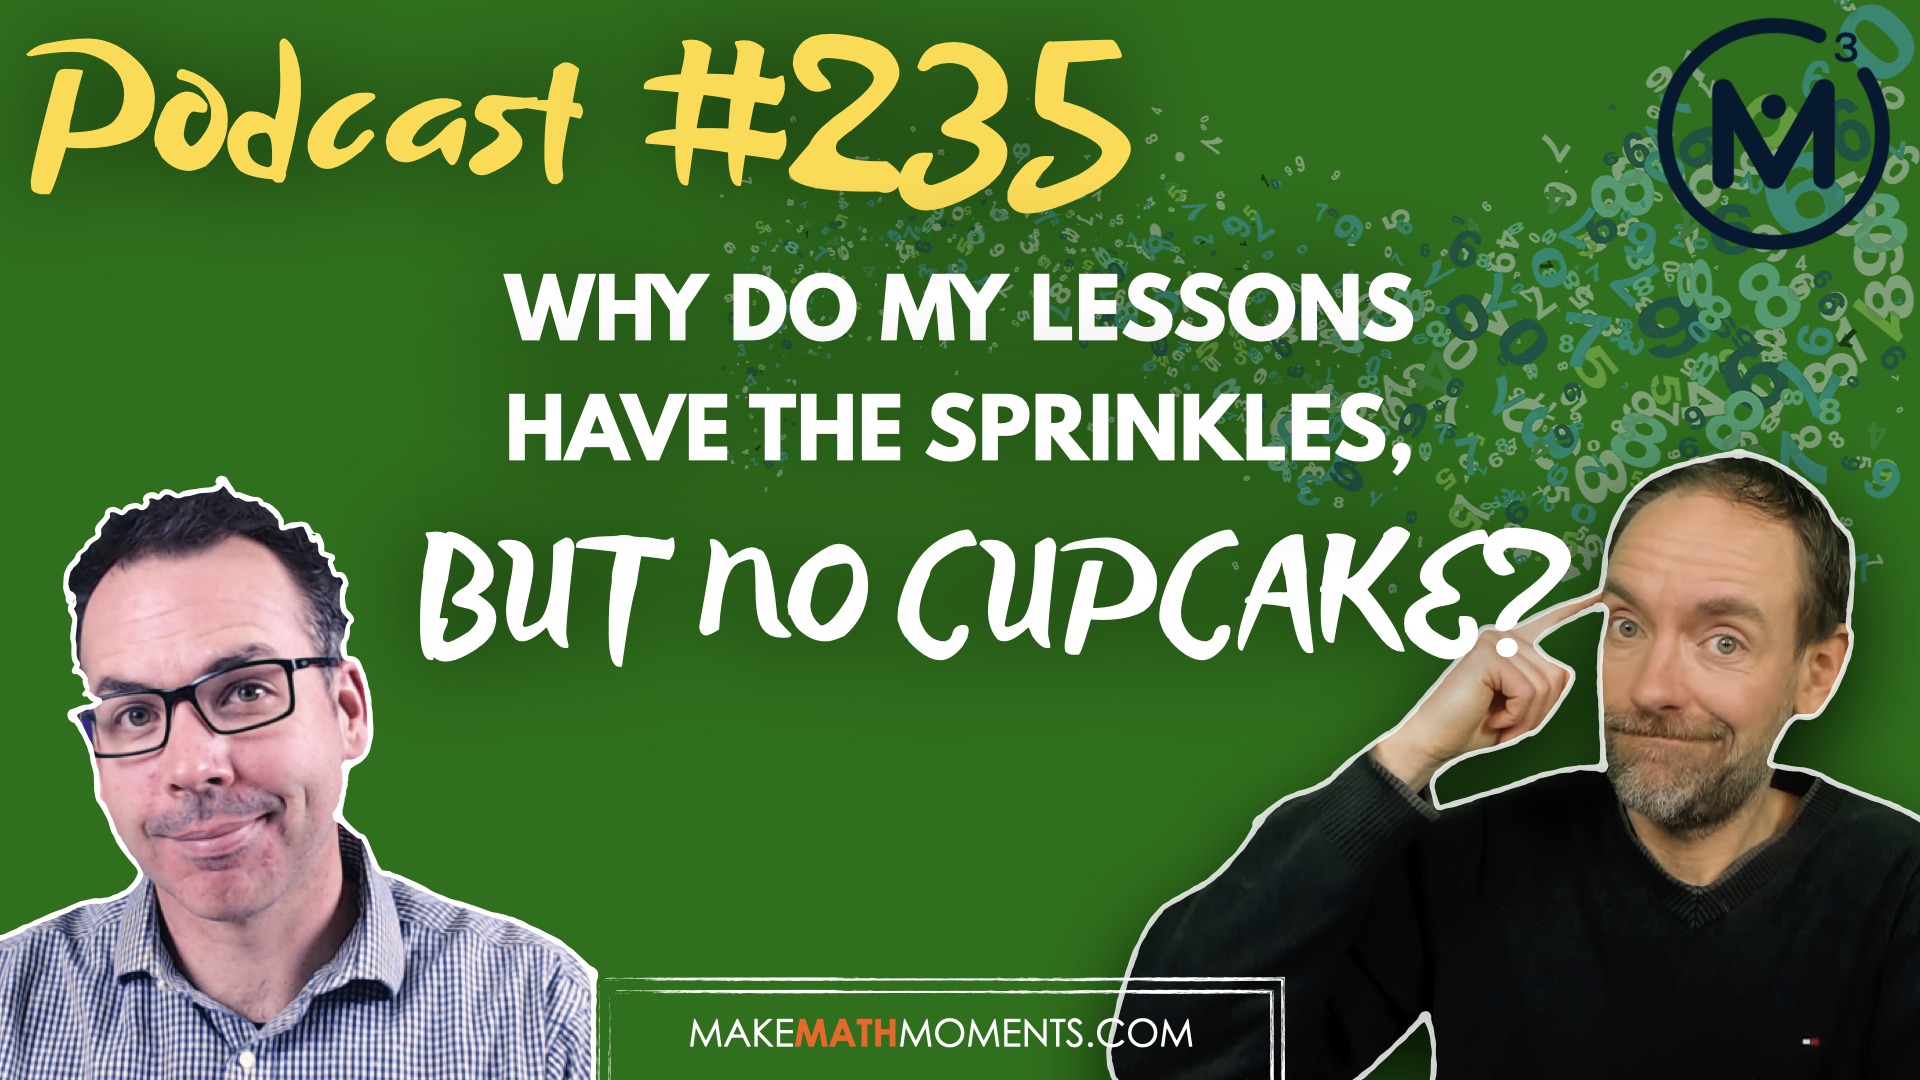 Episode 235: Why Do My Lessons Have The Sprinkles, But No Cupcake? – A Math Mentoring Moment